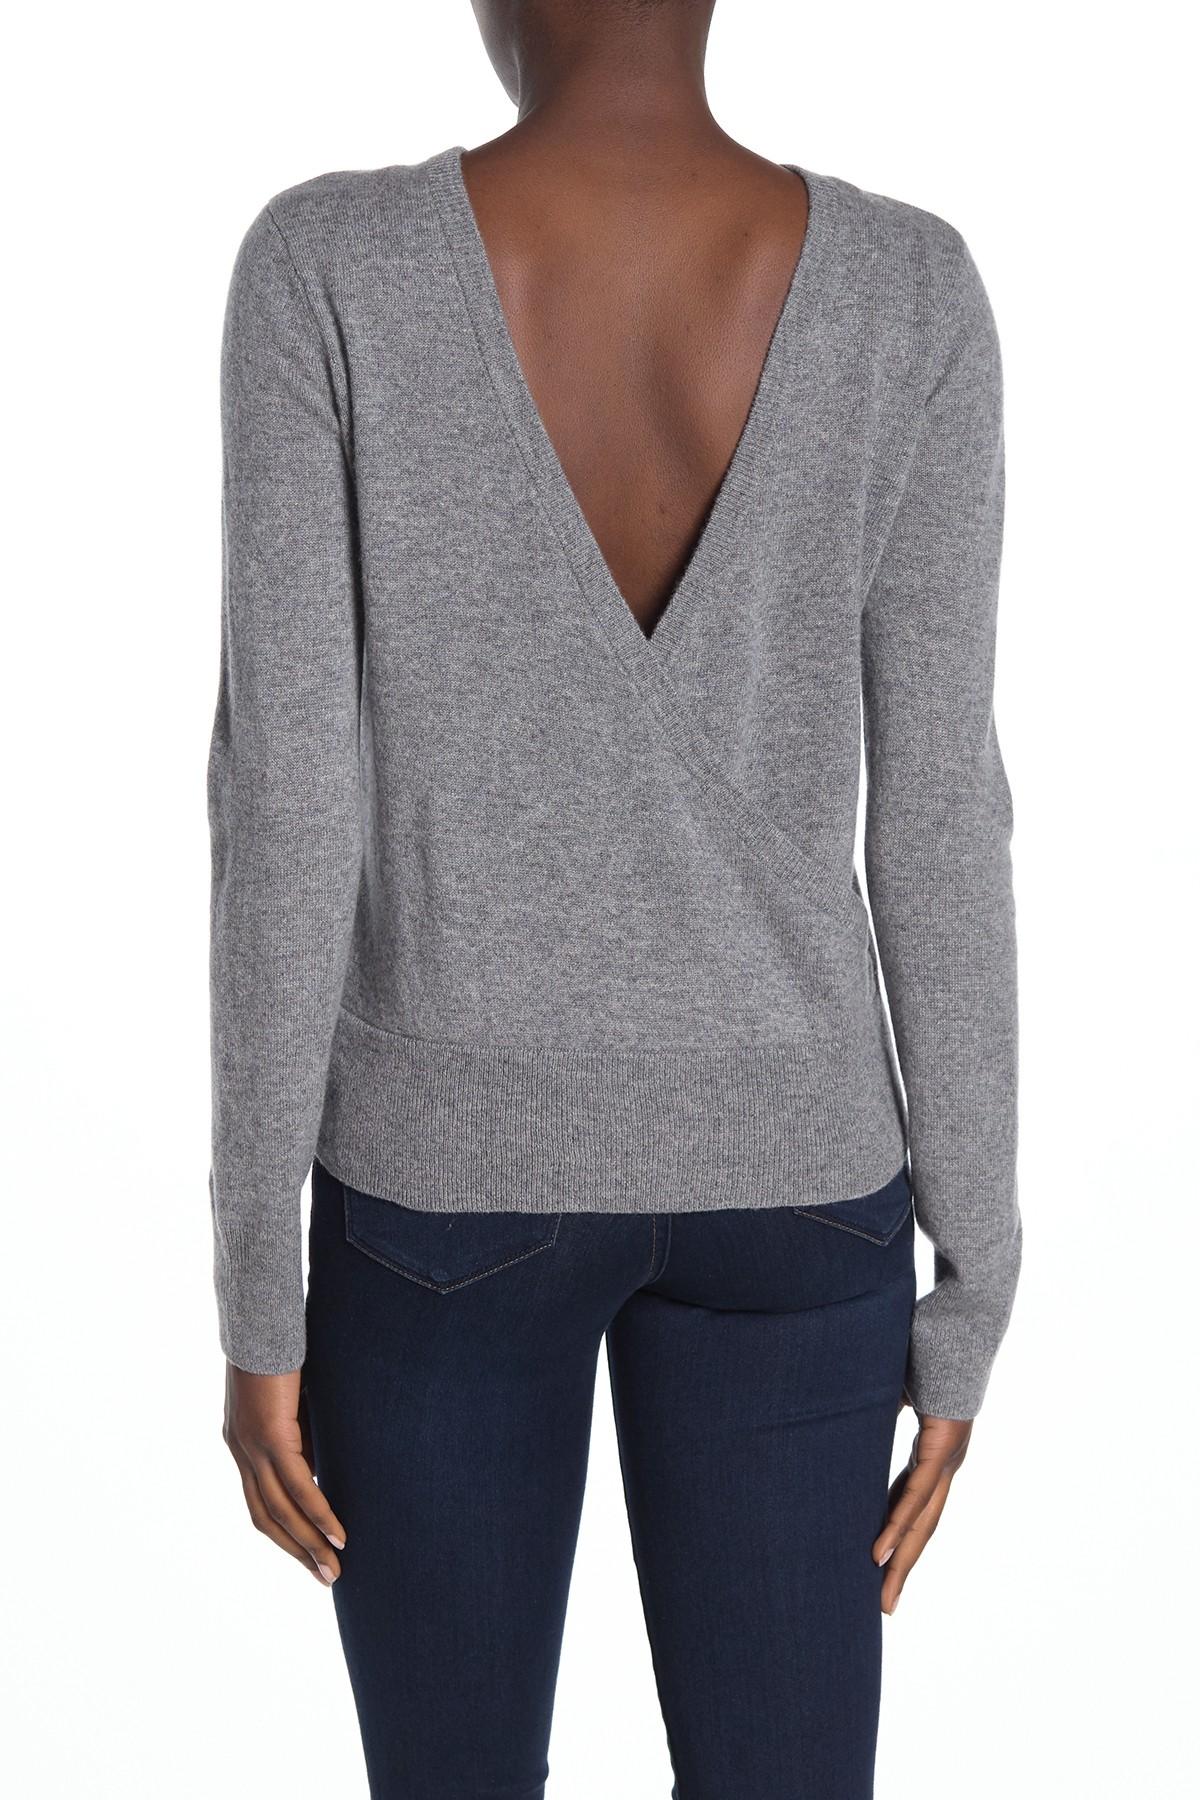 Download Equipment Dante V-back Cashmere Sweater in Heather Grey ...